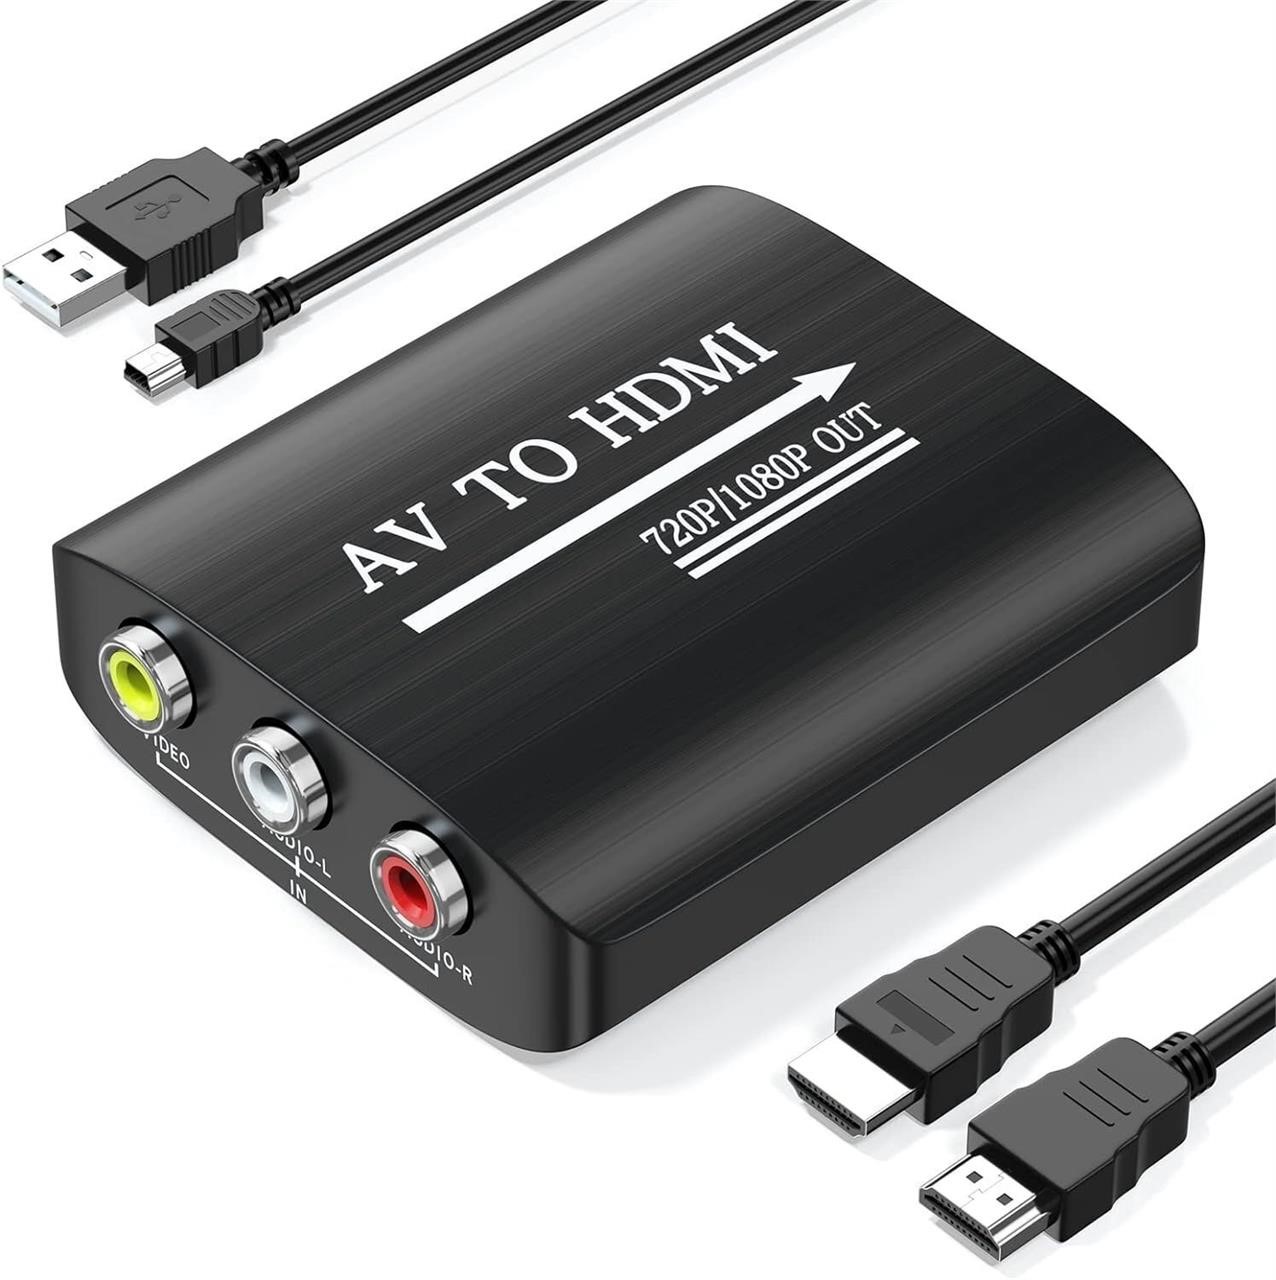 AV to HDMI Converter with HDMI Cable